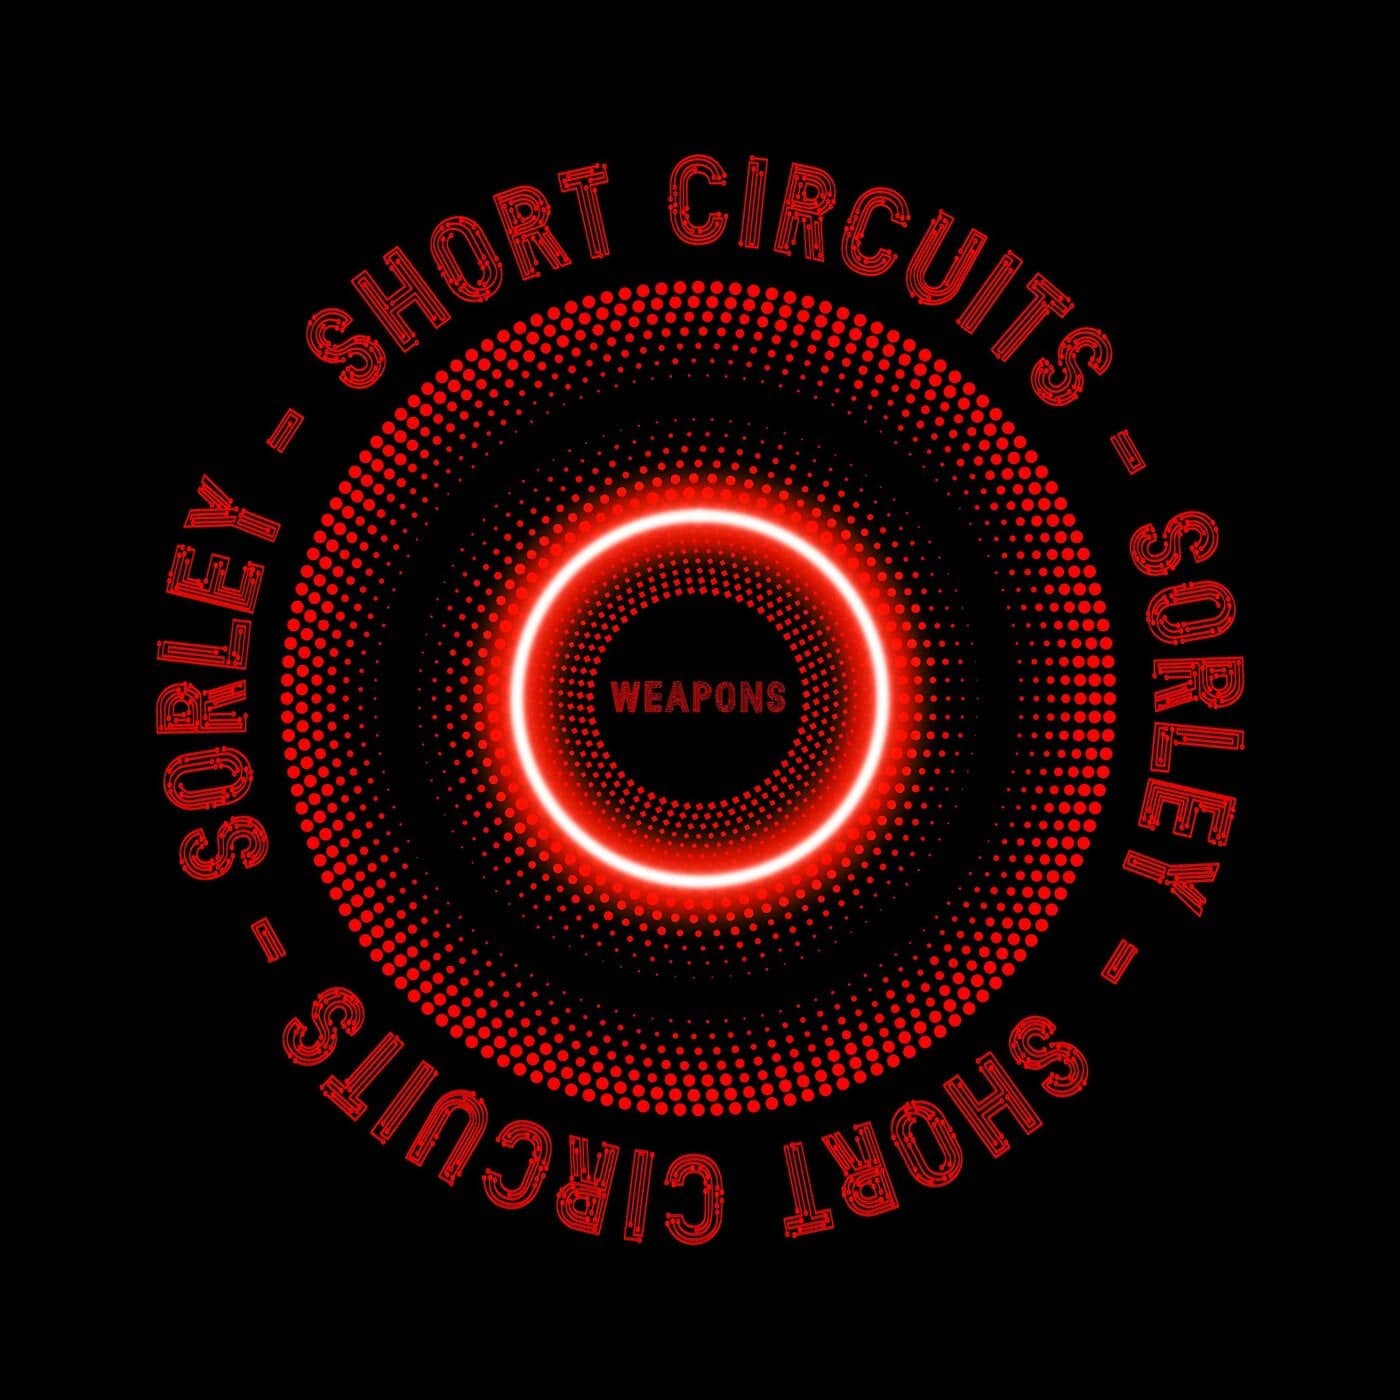 Download Sorley - Short Circuits on Electrobuzz